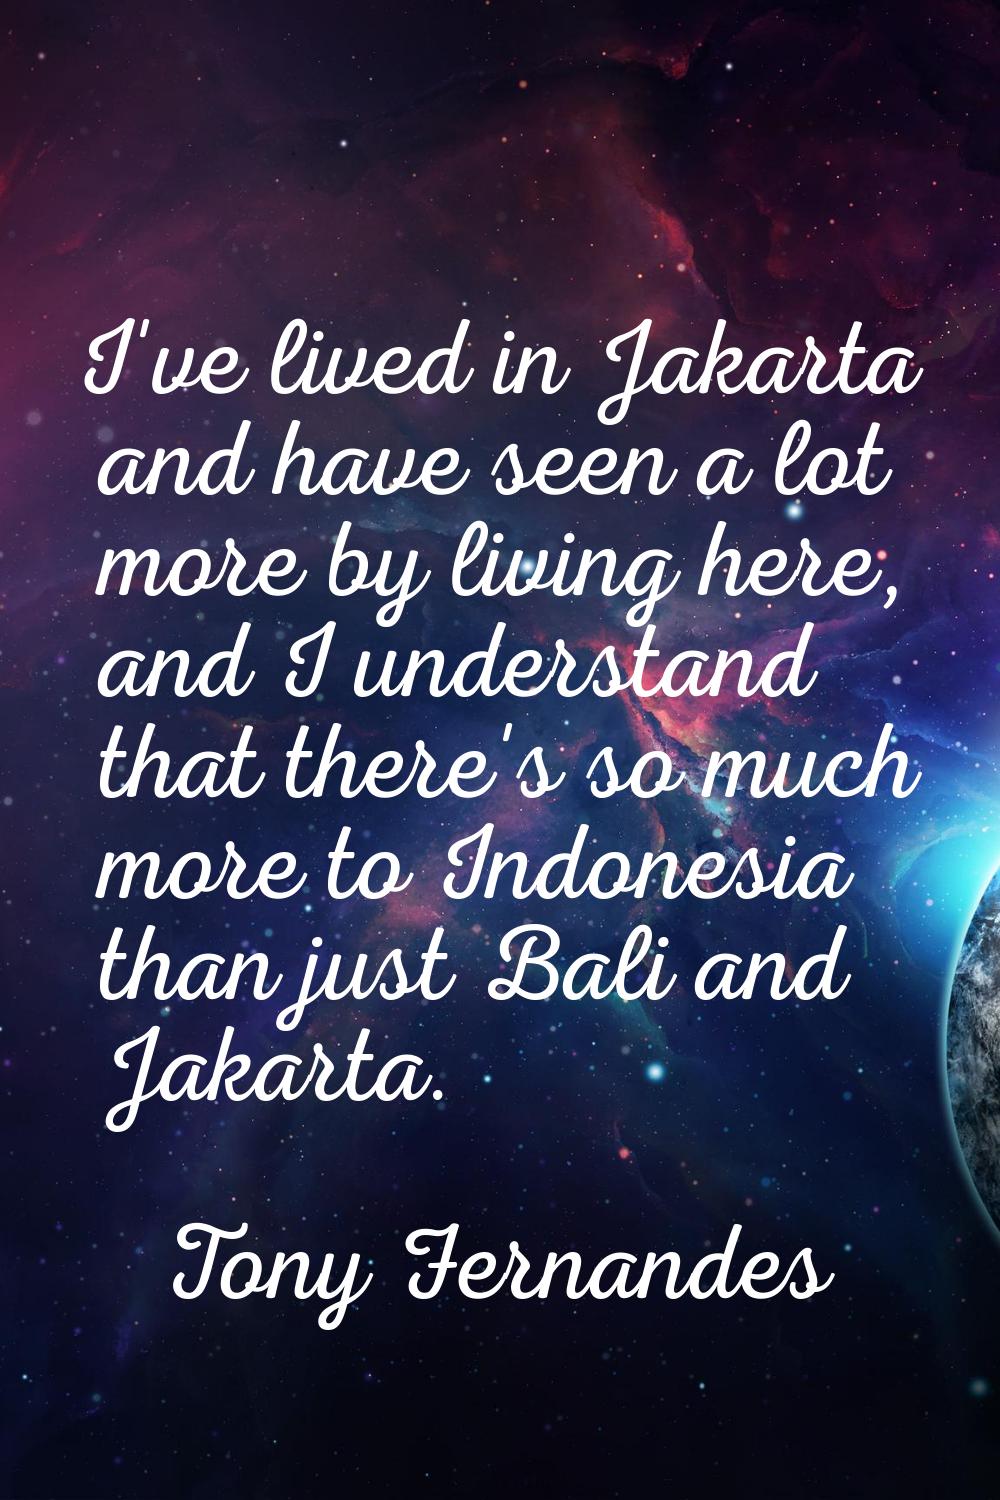 I've lived in Jakarta and have seen a lot more by living here, and I understand that there's so muc